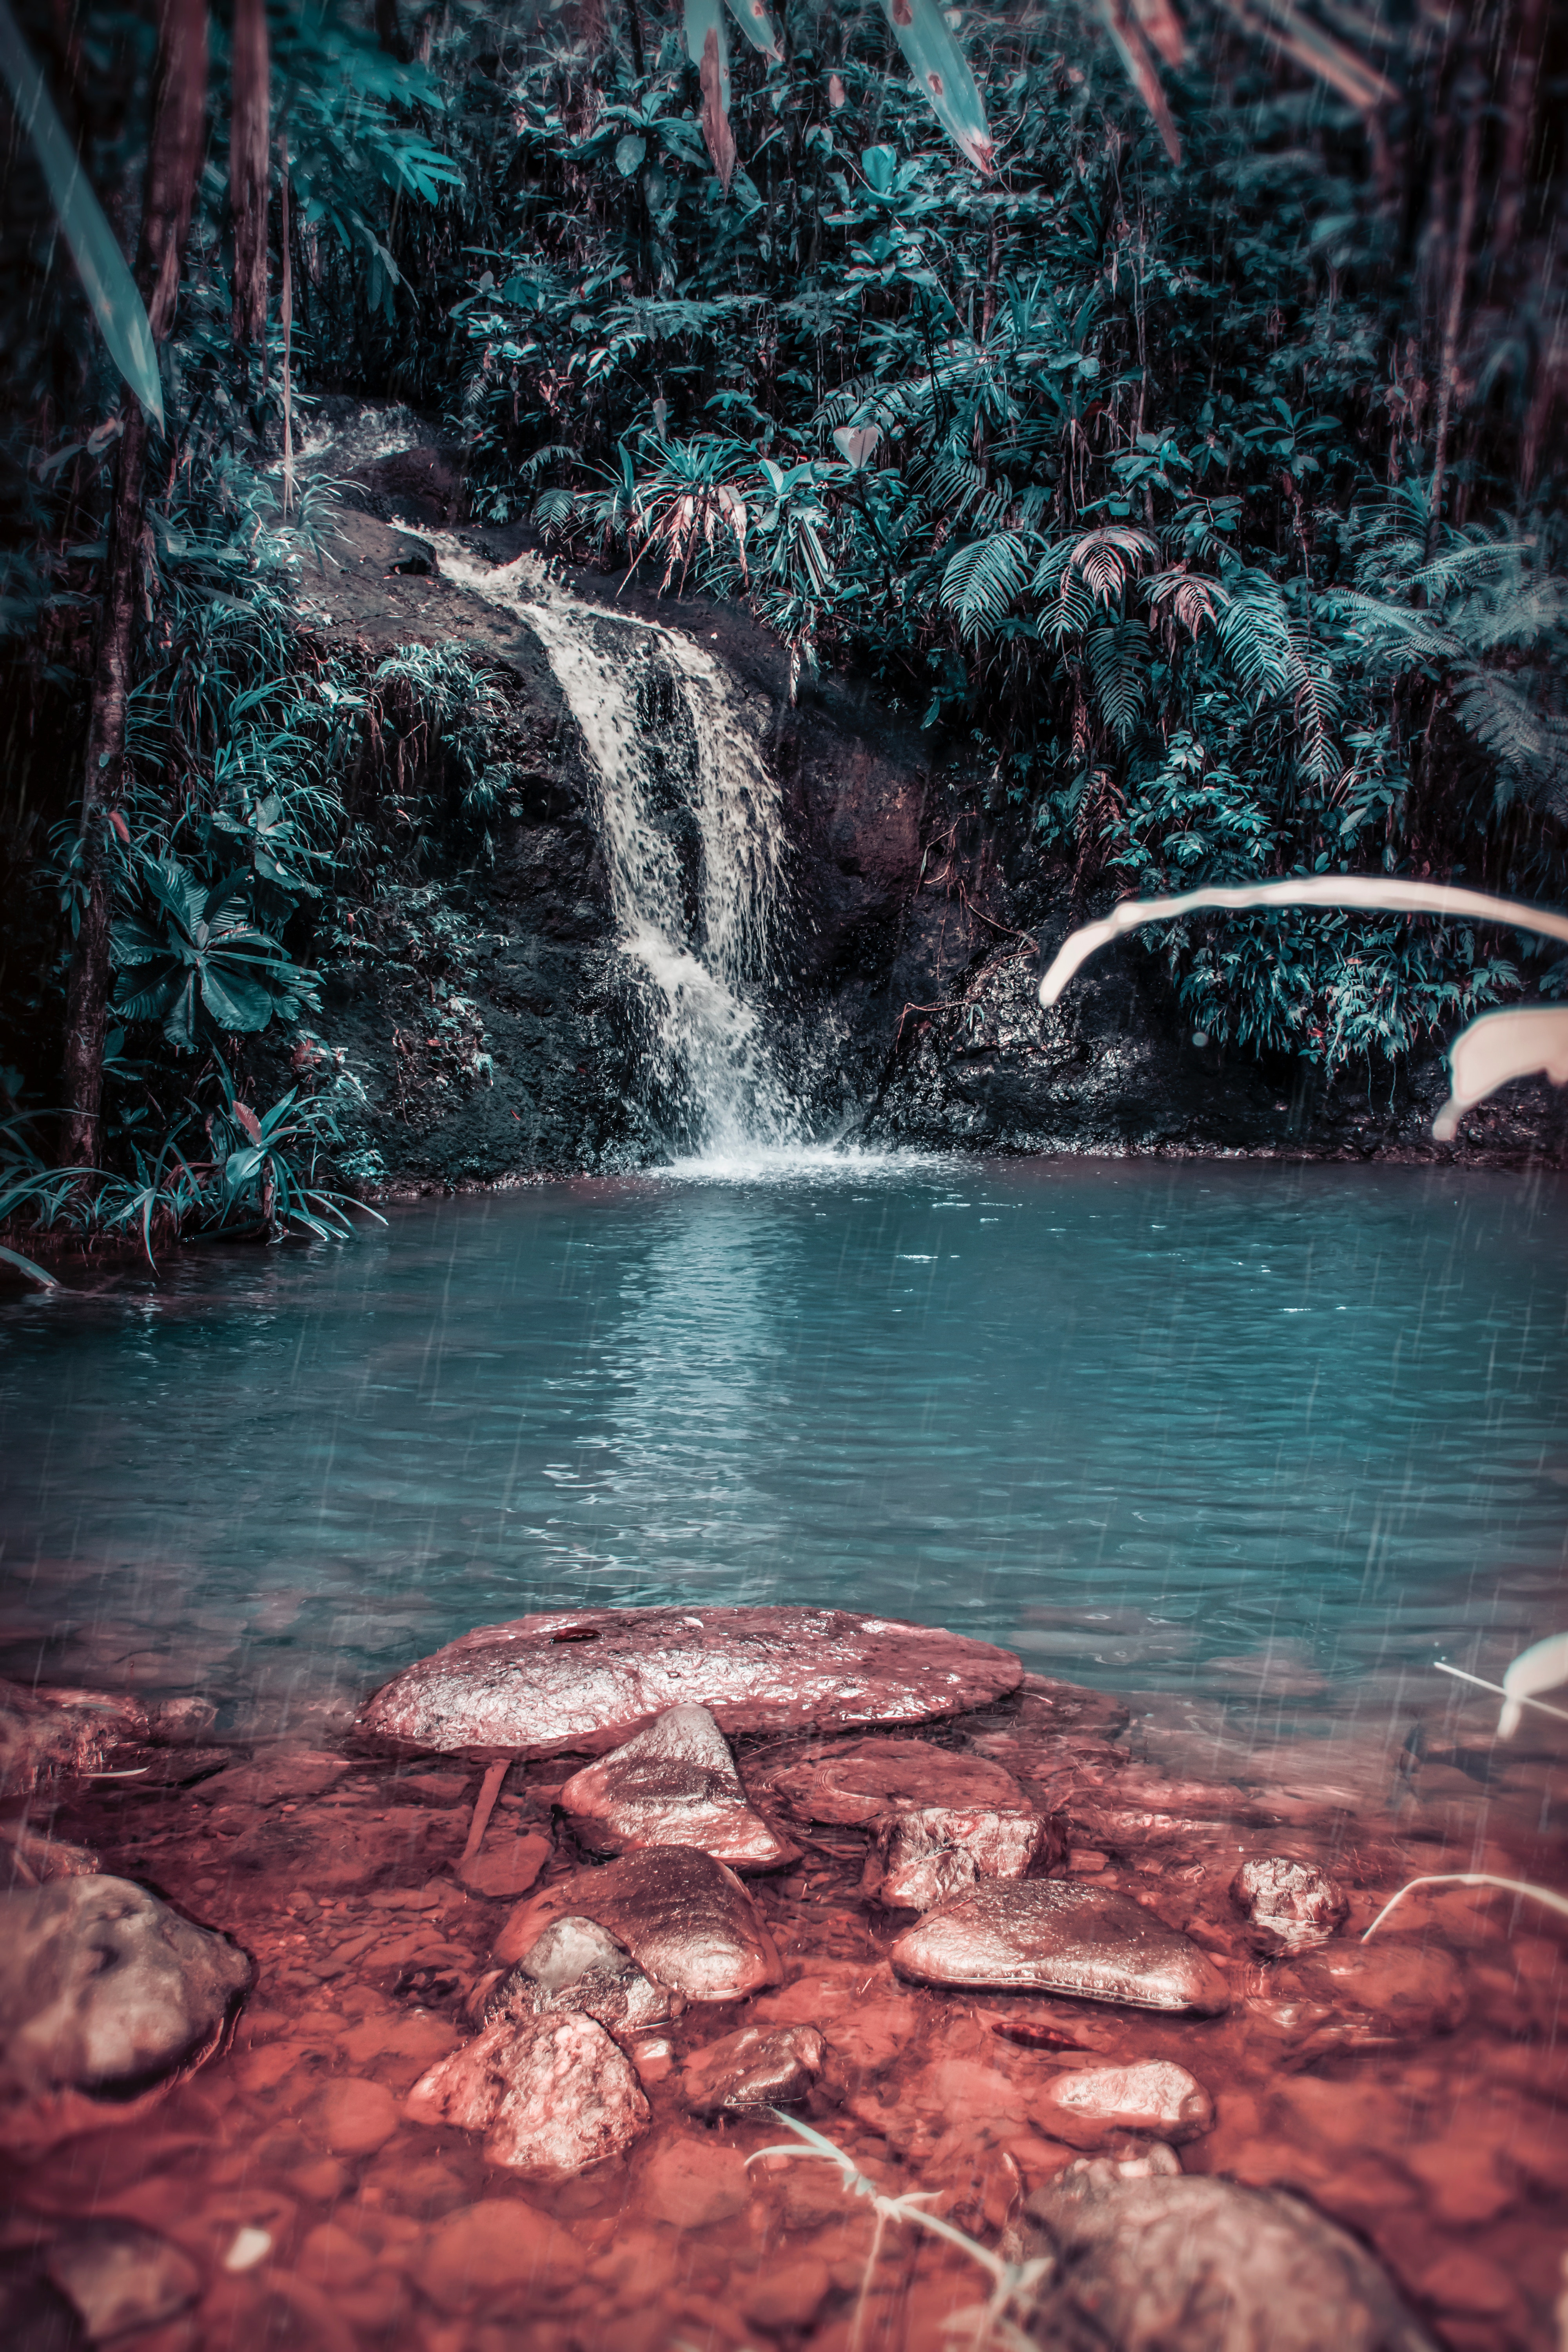 8k Waterfall Images